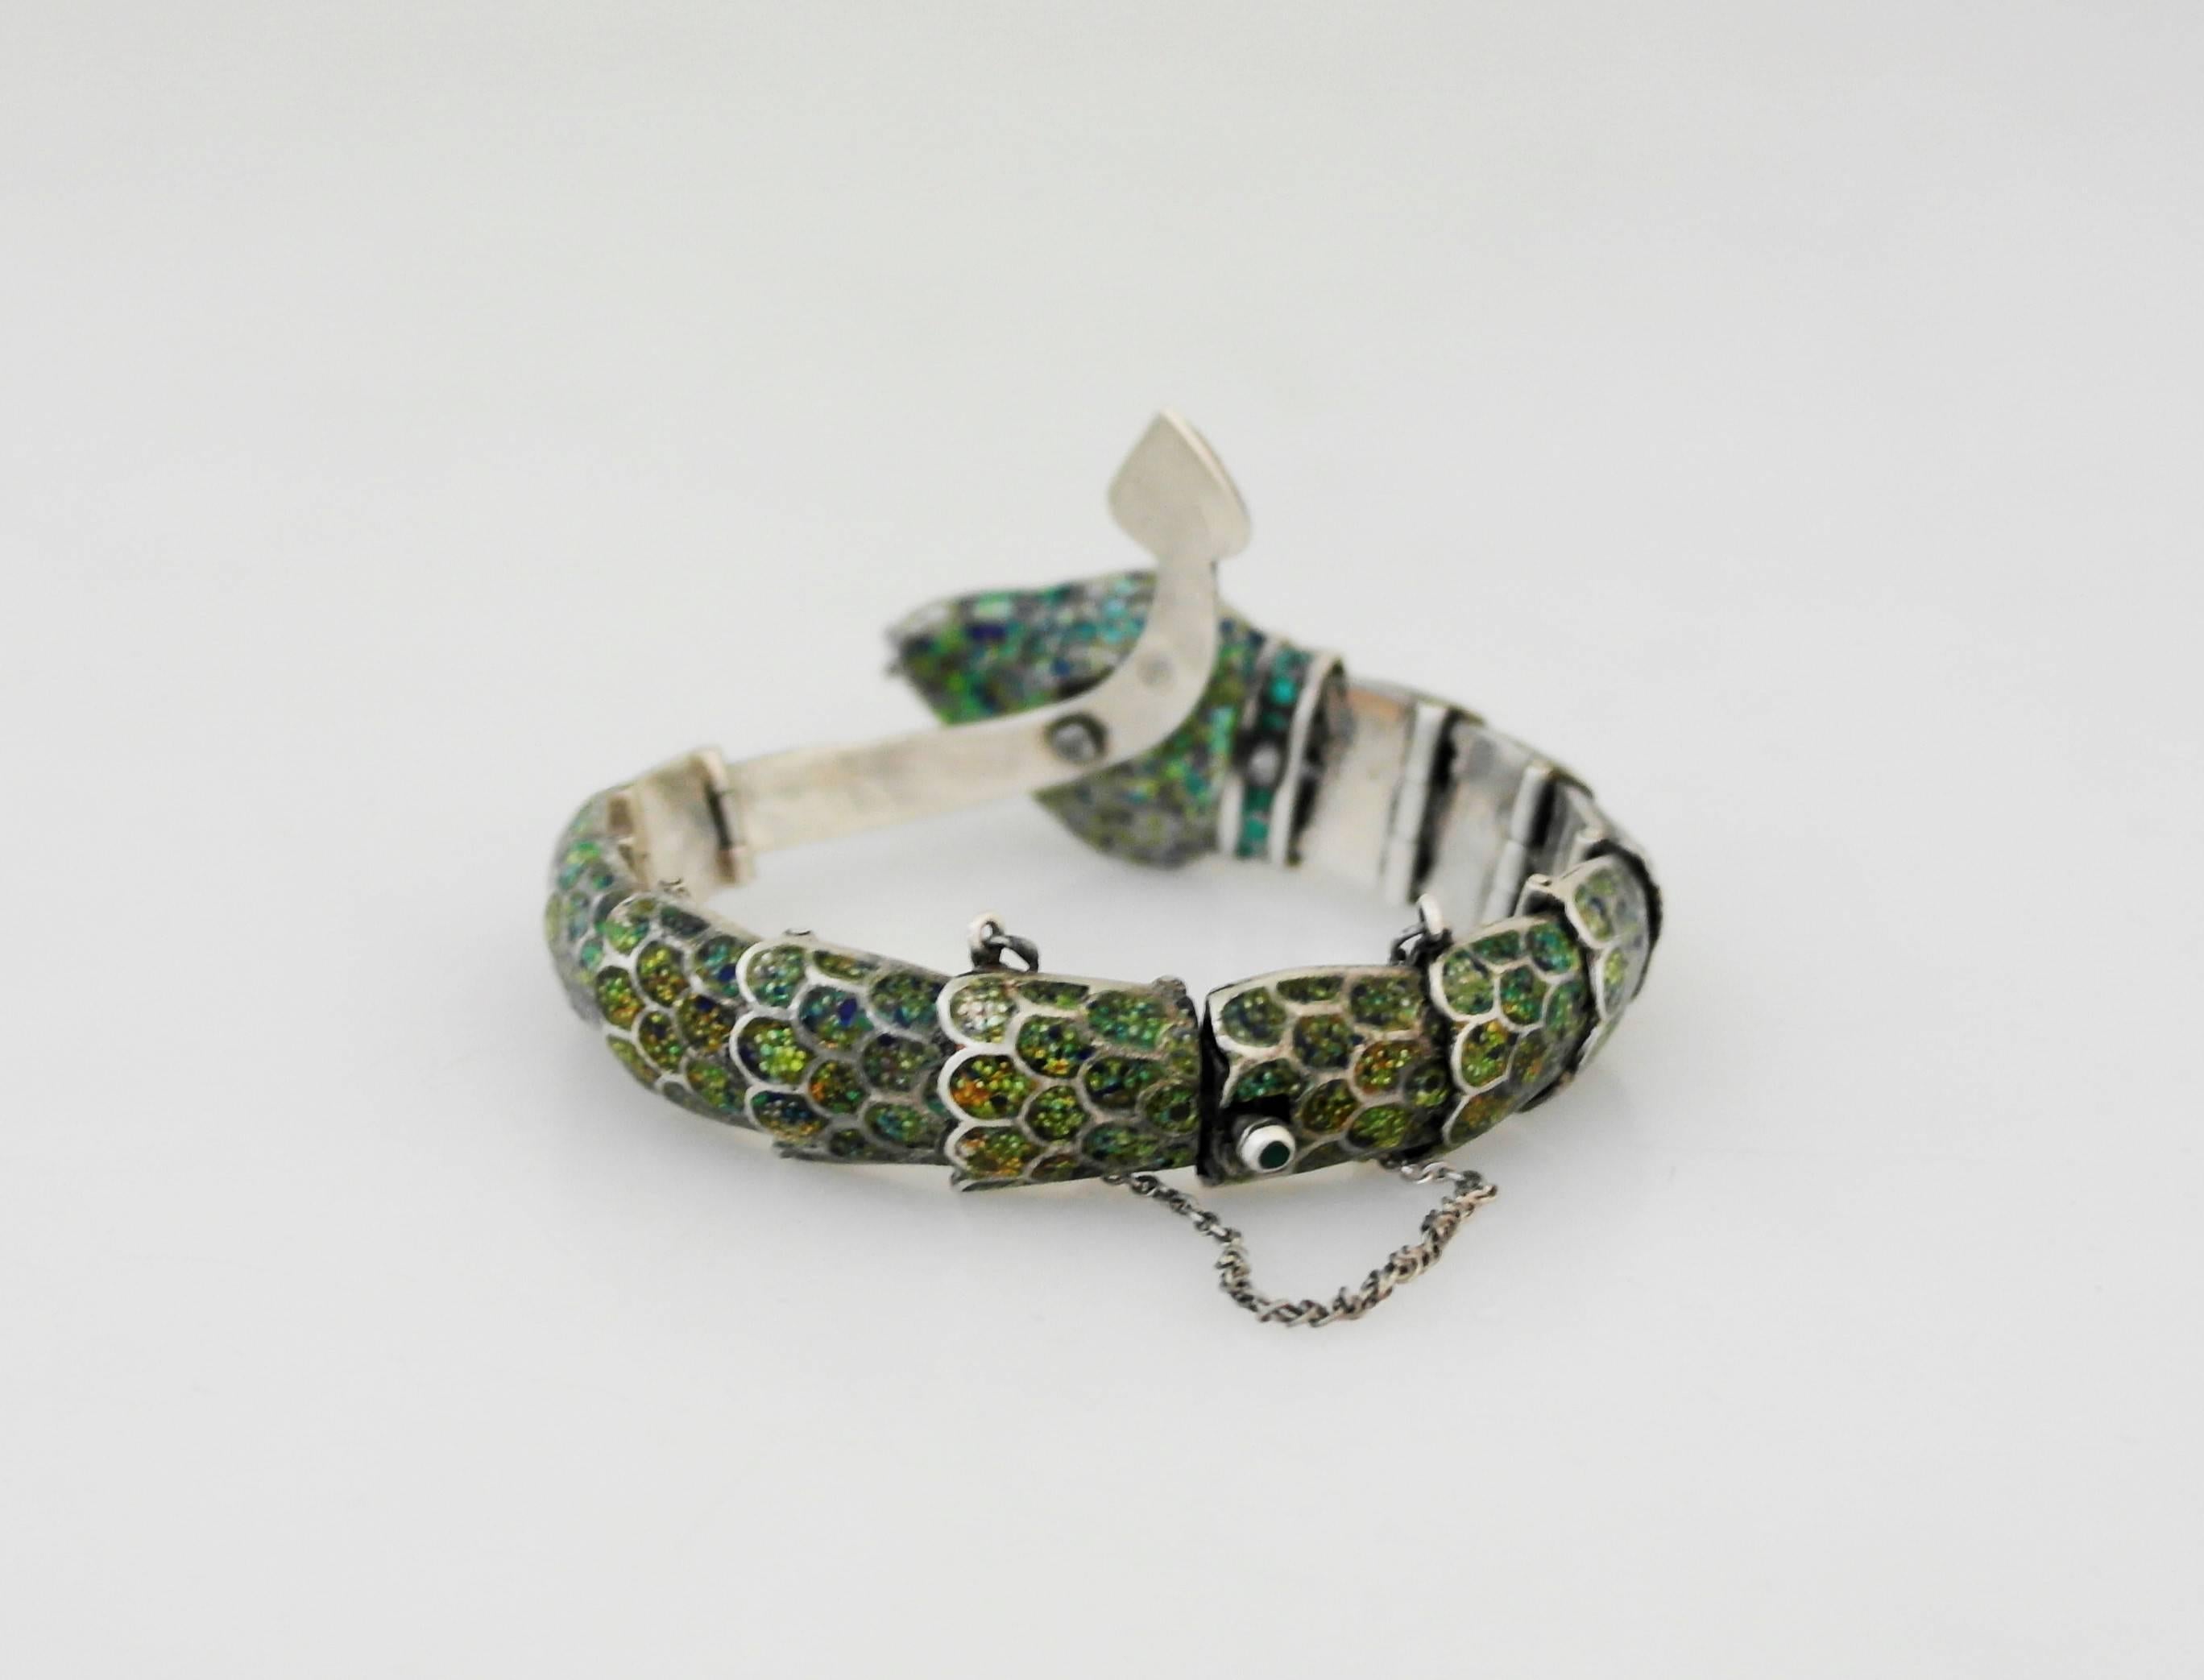 Margot De Taxco Enamel Sterling Silver Snake Bracelet In Excellent Condition For Sale In New York, NY